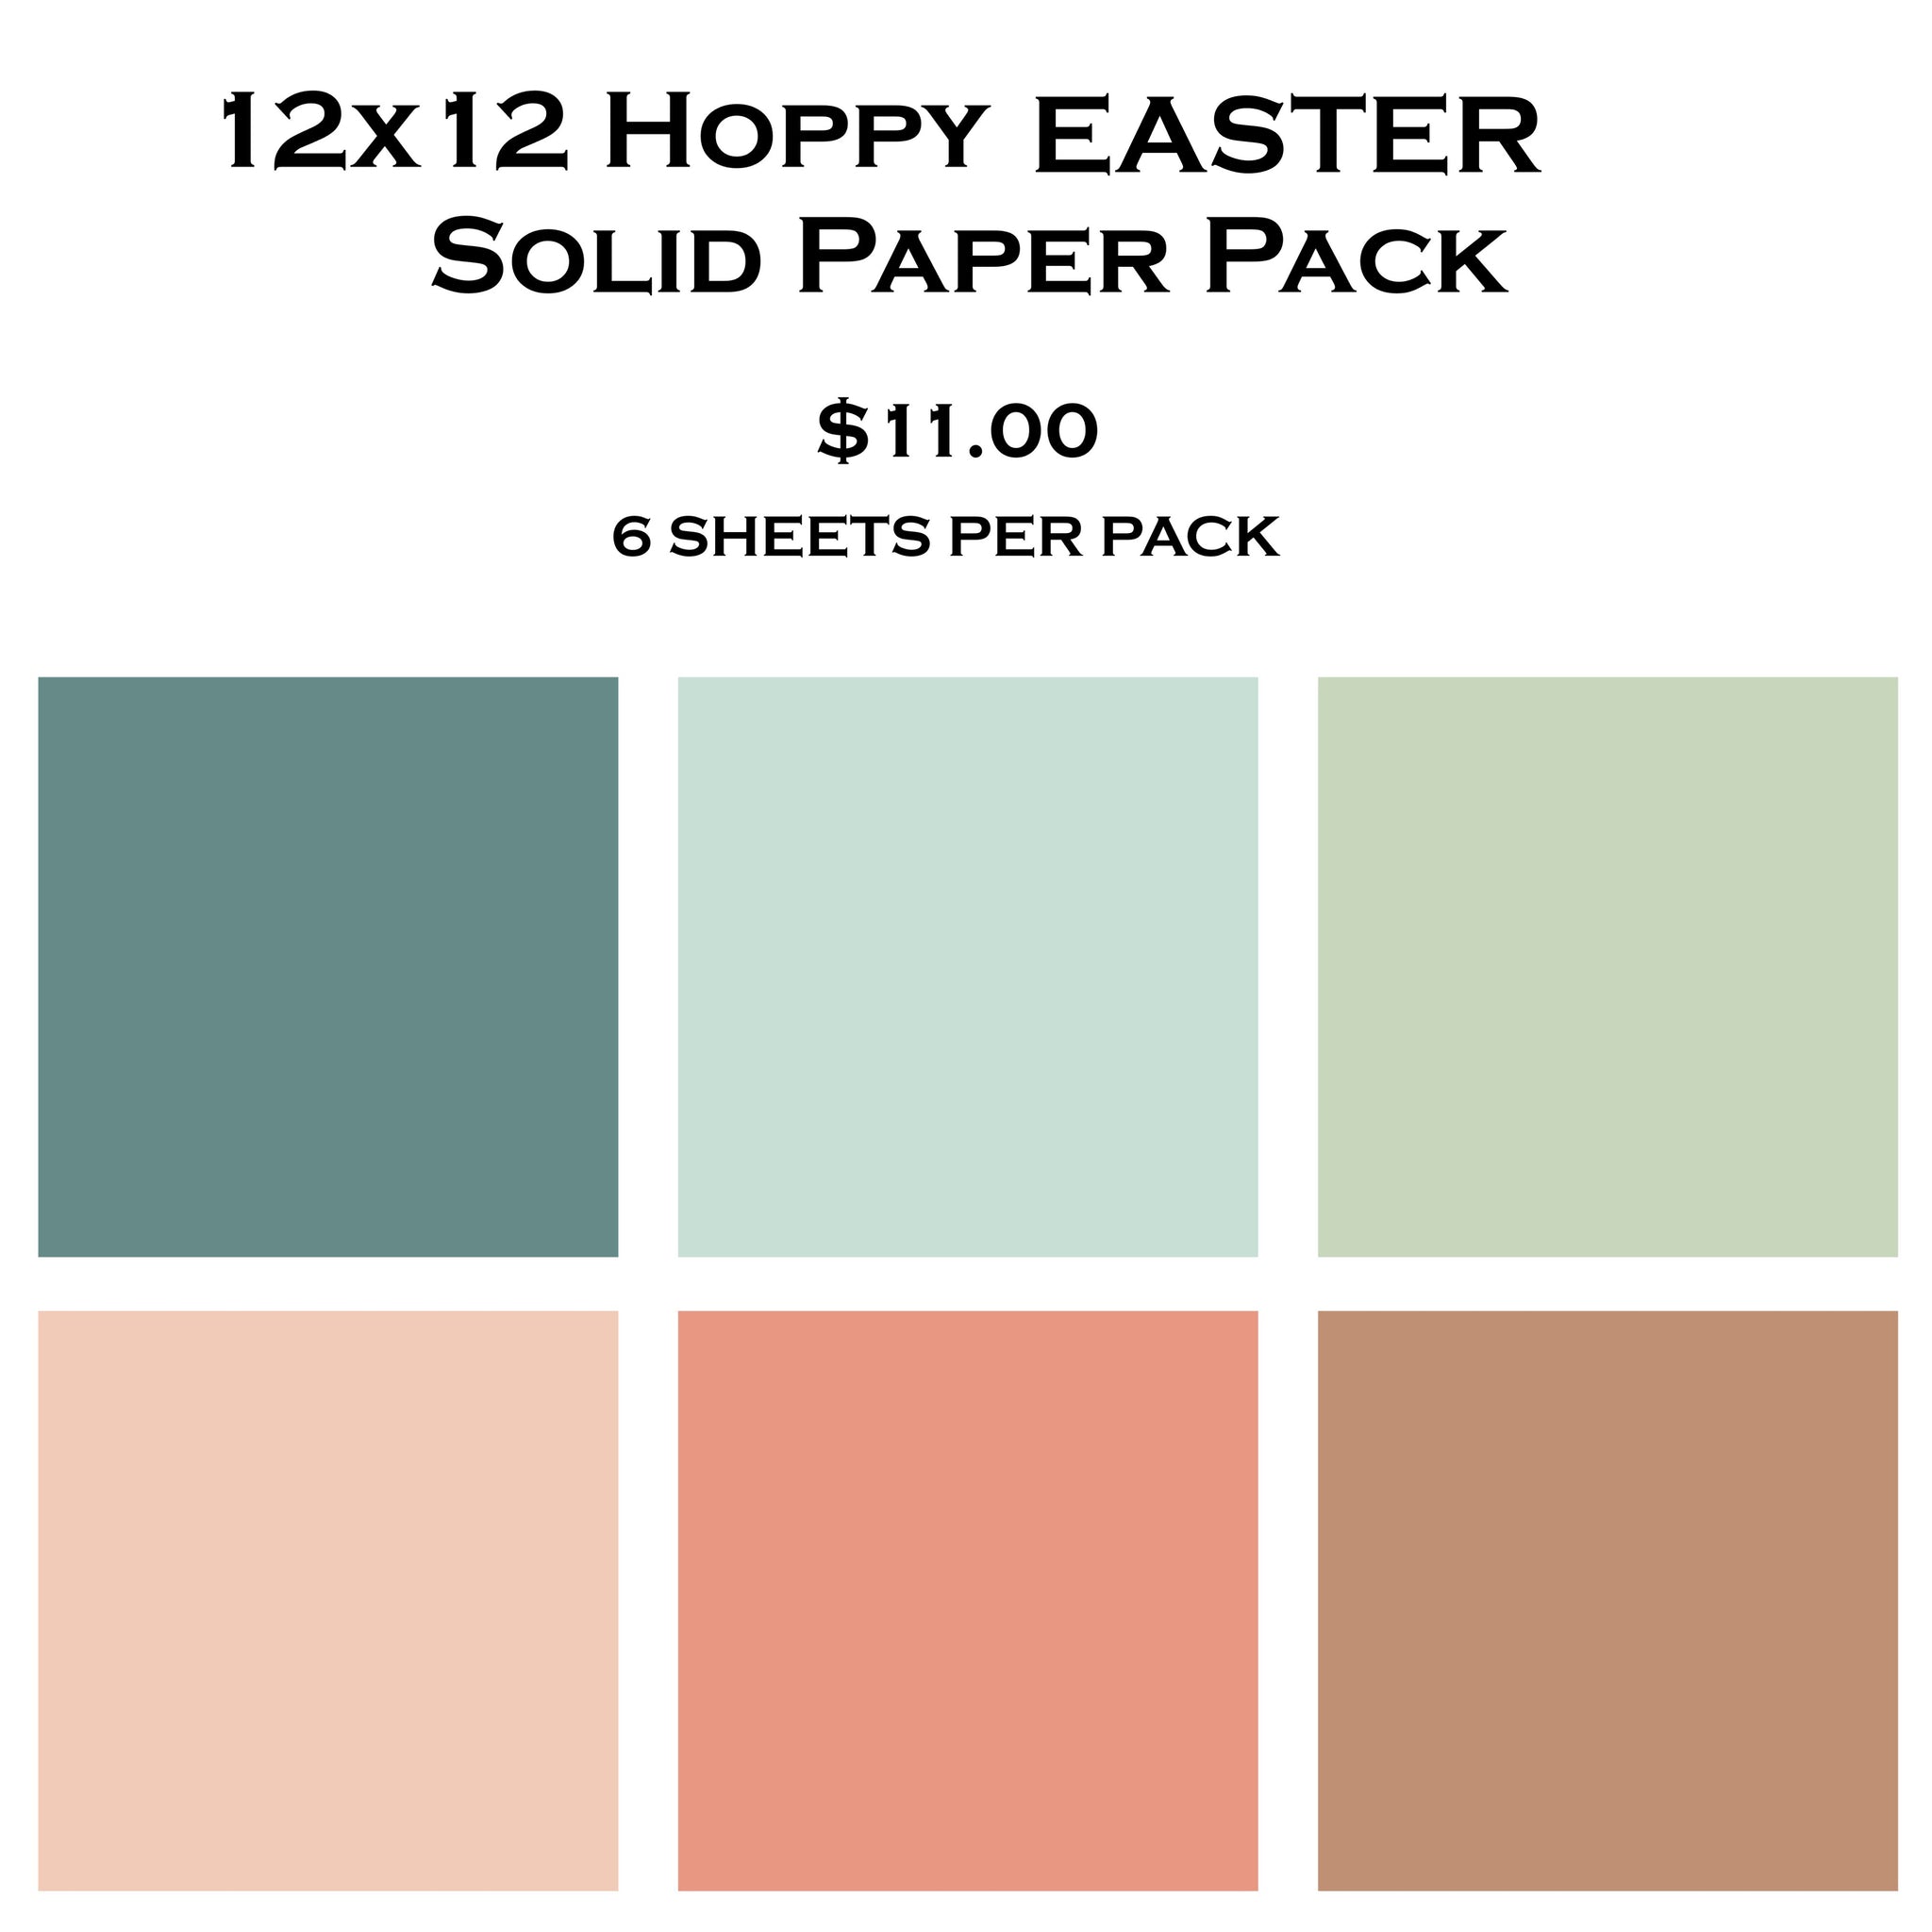 Hoppy Easter 12x12 Solid Paper Pack